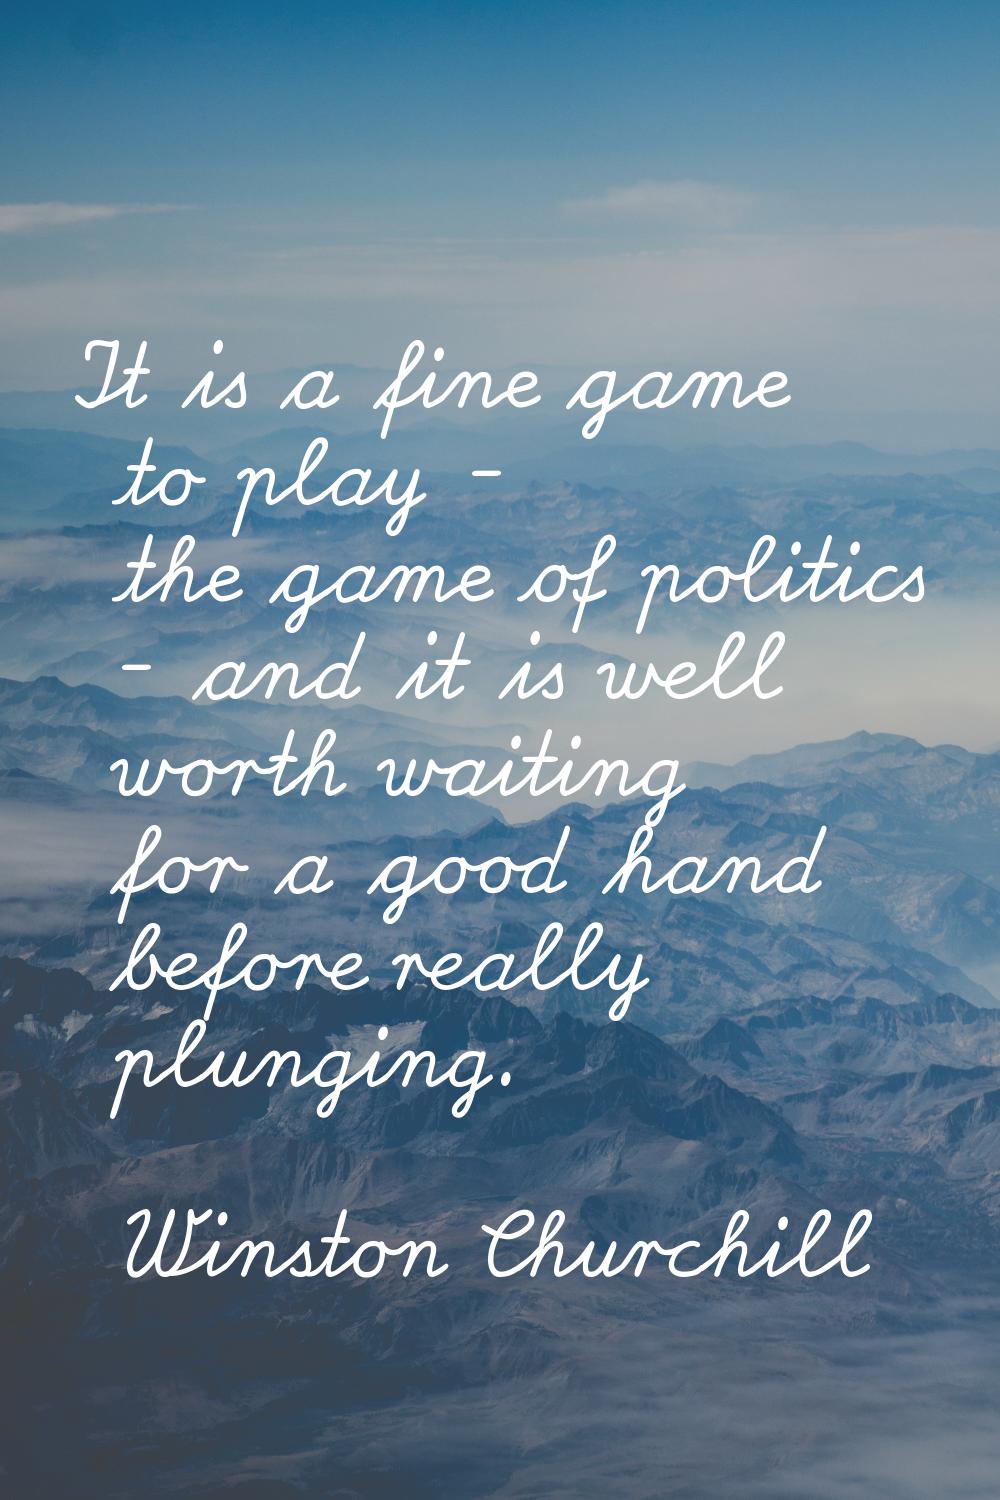 It is a fine game to play - the game of politics - and it is well worth waiting for a good hand bef